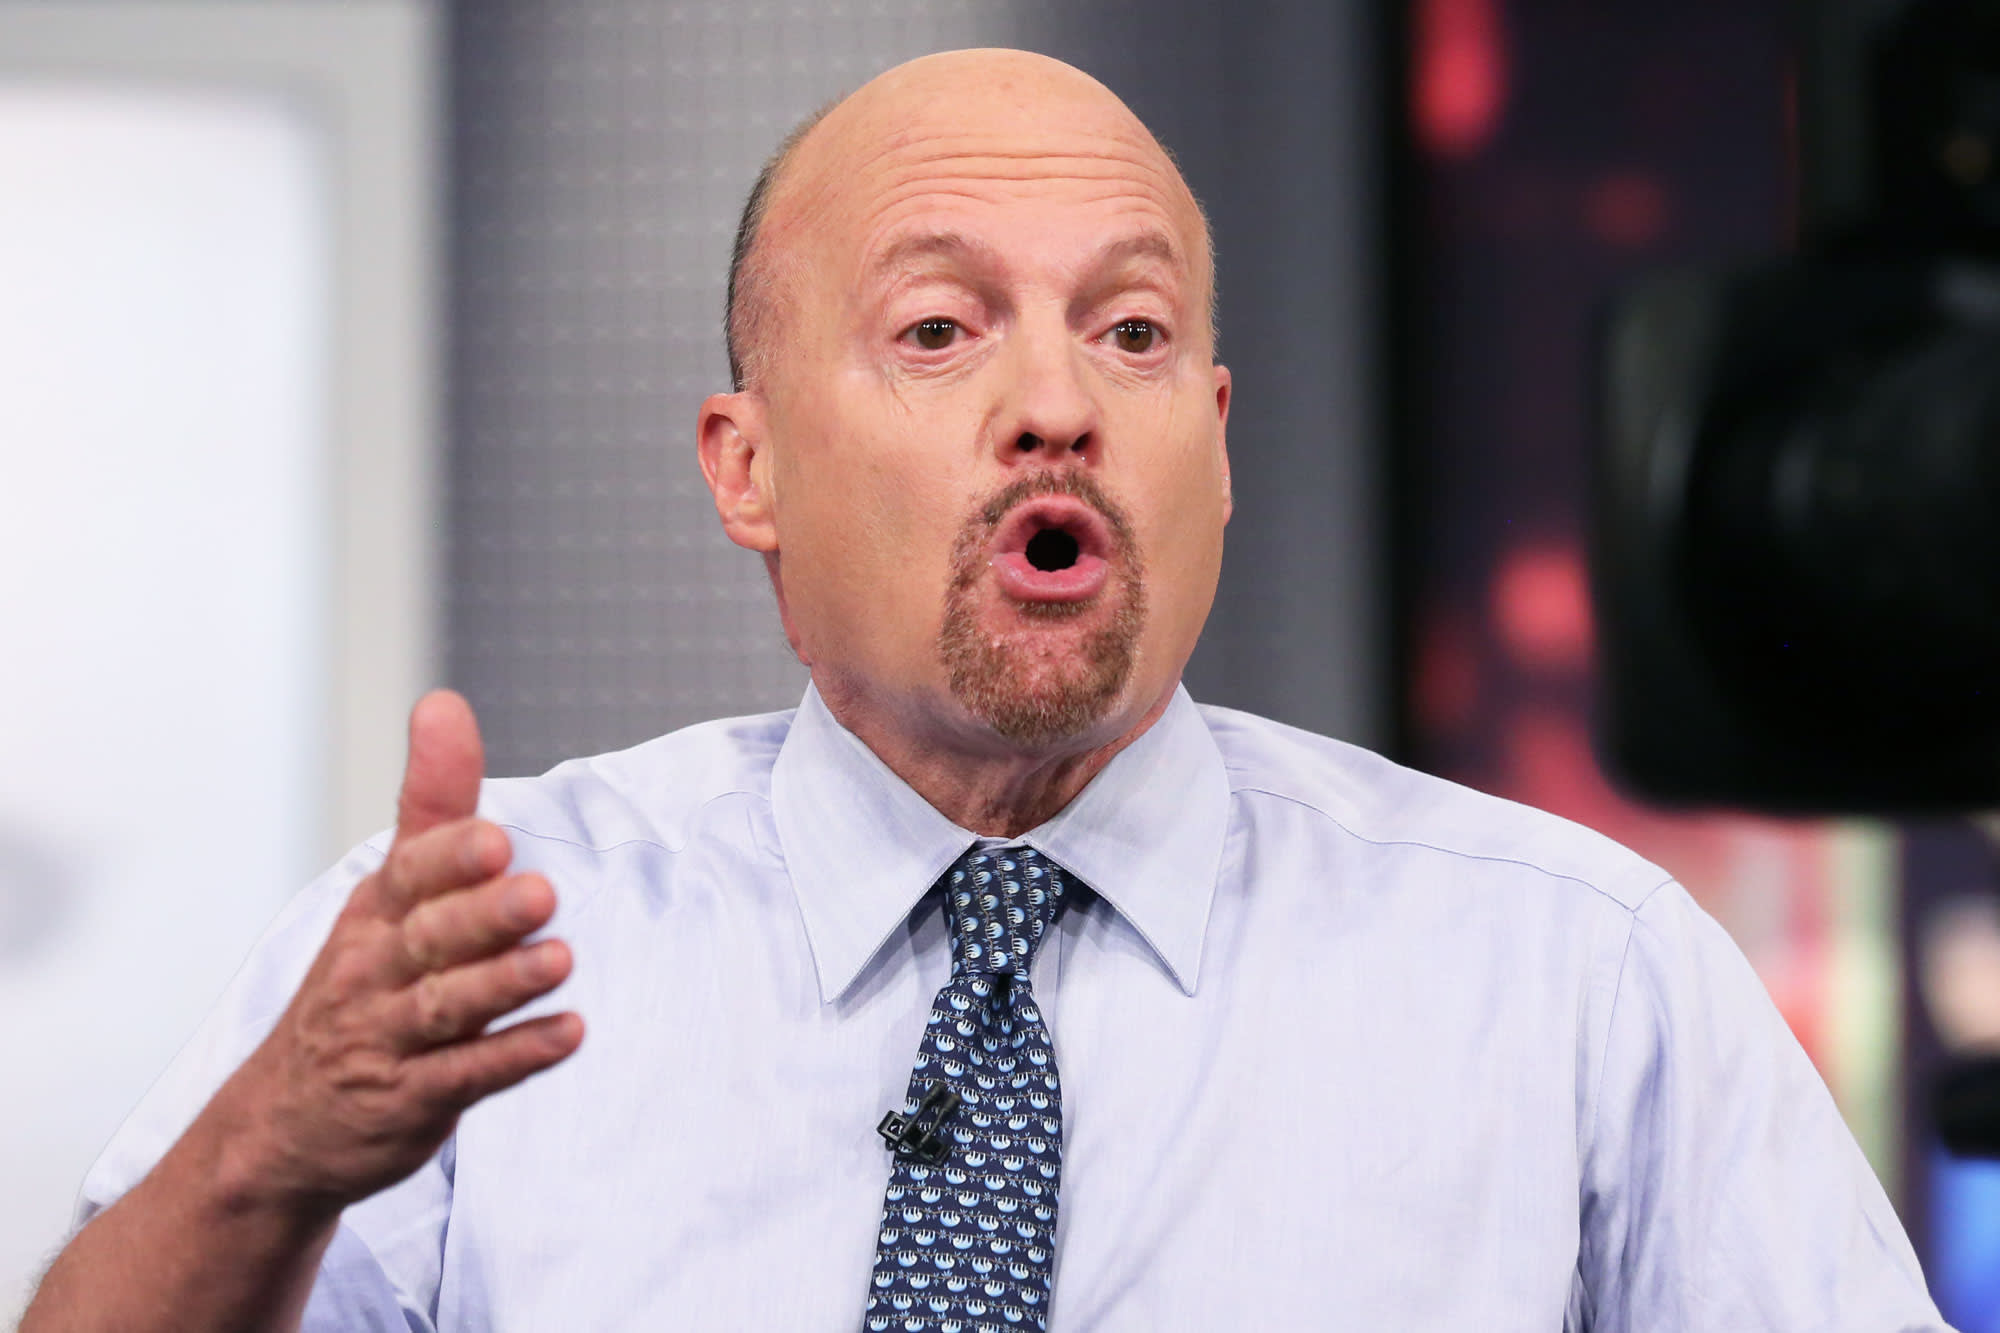 Jim Cramer’s Advice On When To Buy Stock In A Volatile ...